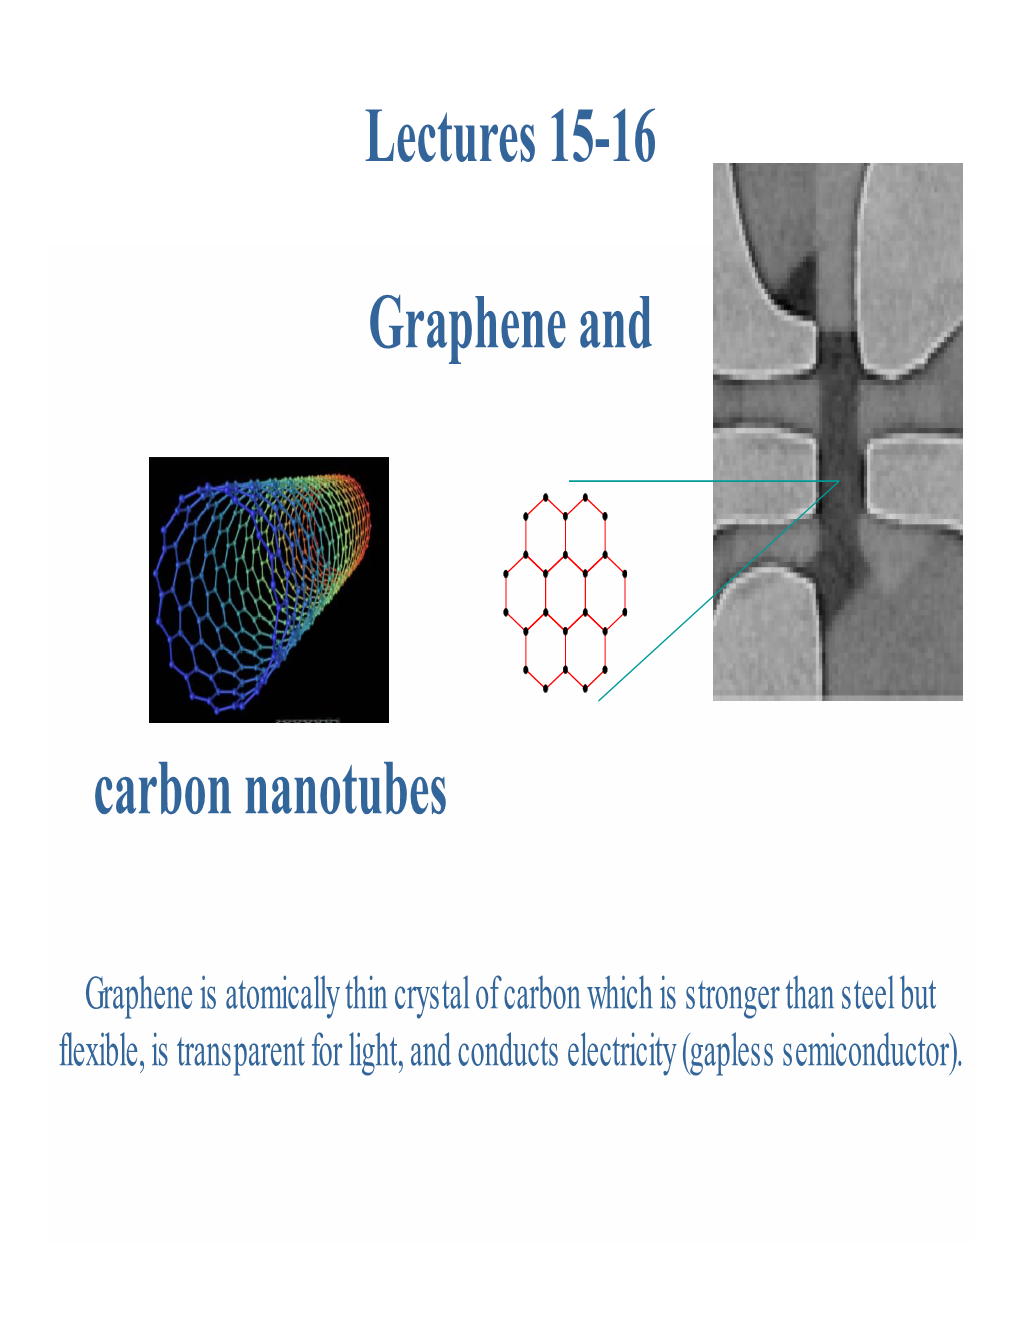 Lectures 15-16 Graphene and Carbon Nanotubes